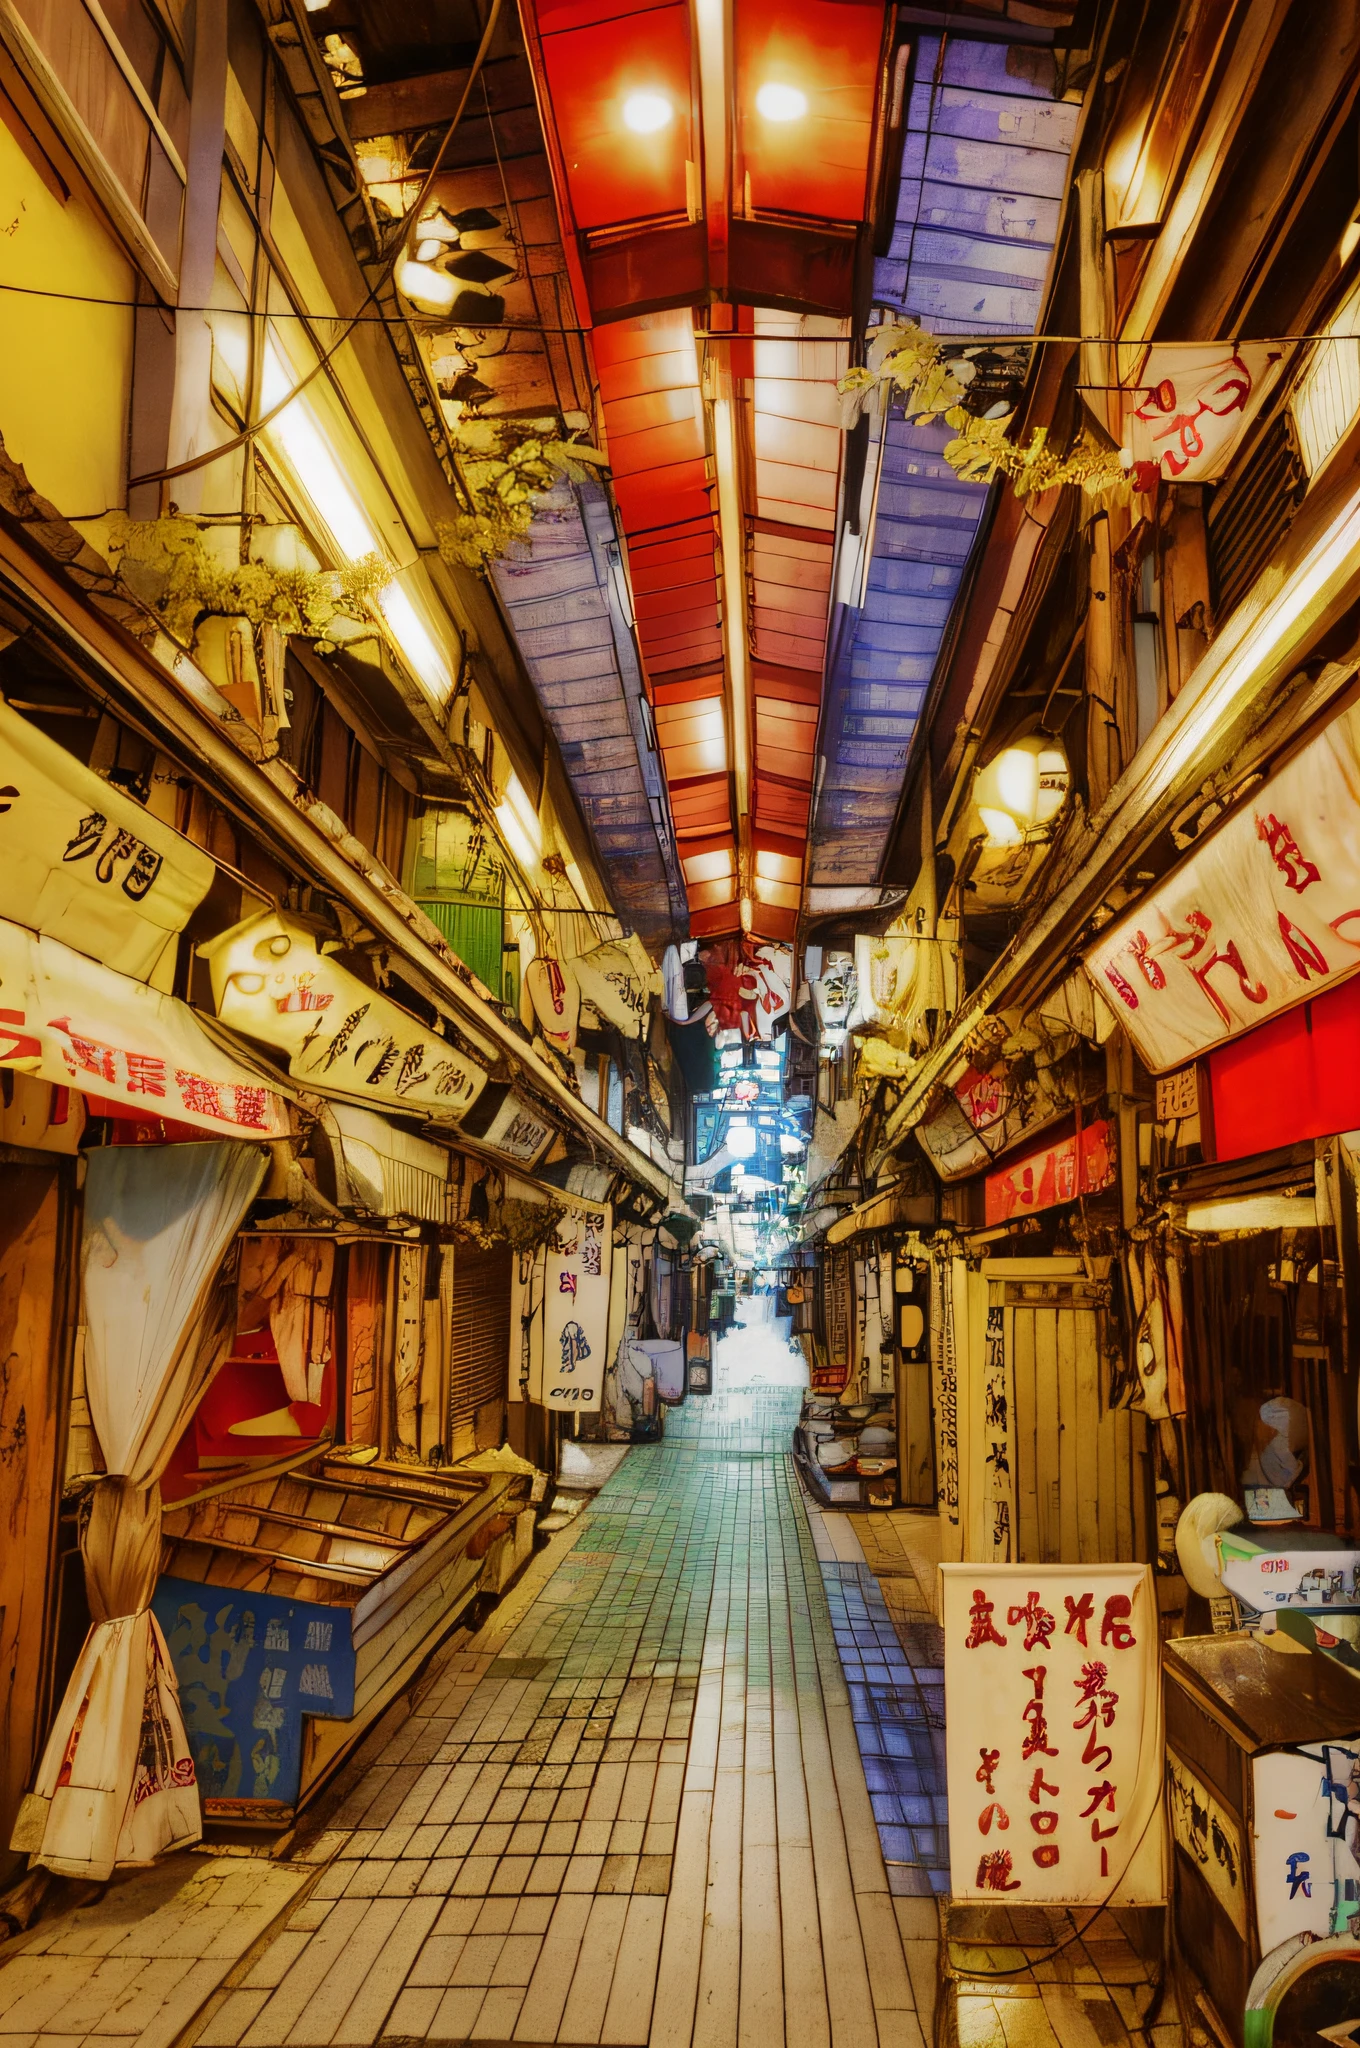 there are many signs hanging from the ceiling in this 시장, old 일본의 거리 시장, 시장 in japan, wet 시장 street, 시장, 버려진 신주쿠 정크, 버려진 신주쿠 정크 town, 오키나와 일본, 도쿄 골목길, the vibrant echoes of the 시장, 일본의 거리, 시장 setting, 일본 시내, fish 시장 stalls, sakimichan hdri